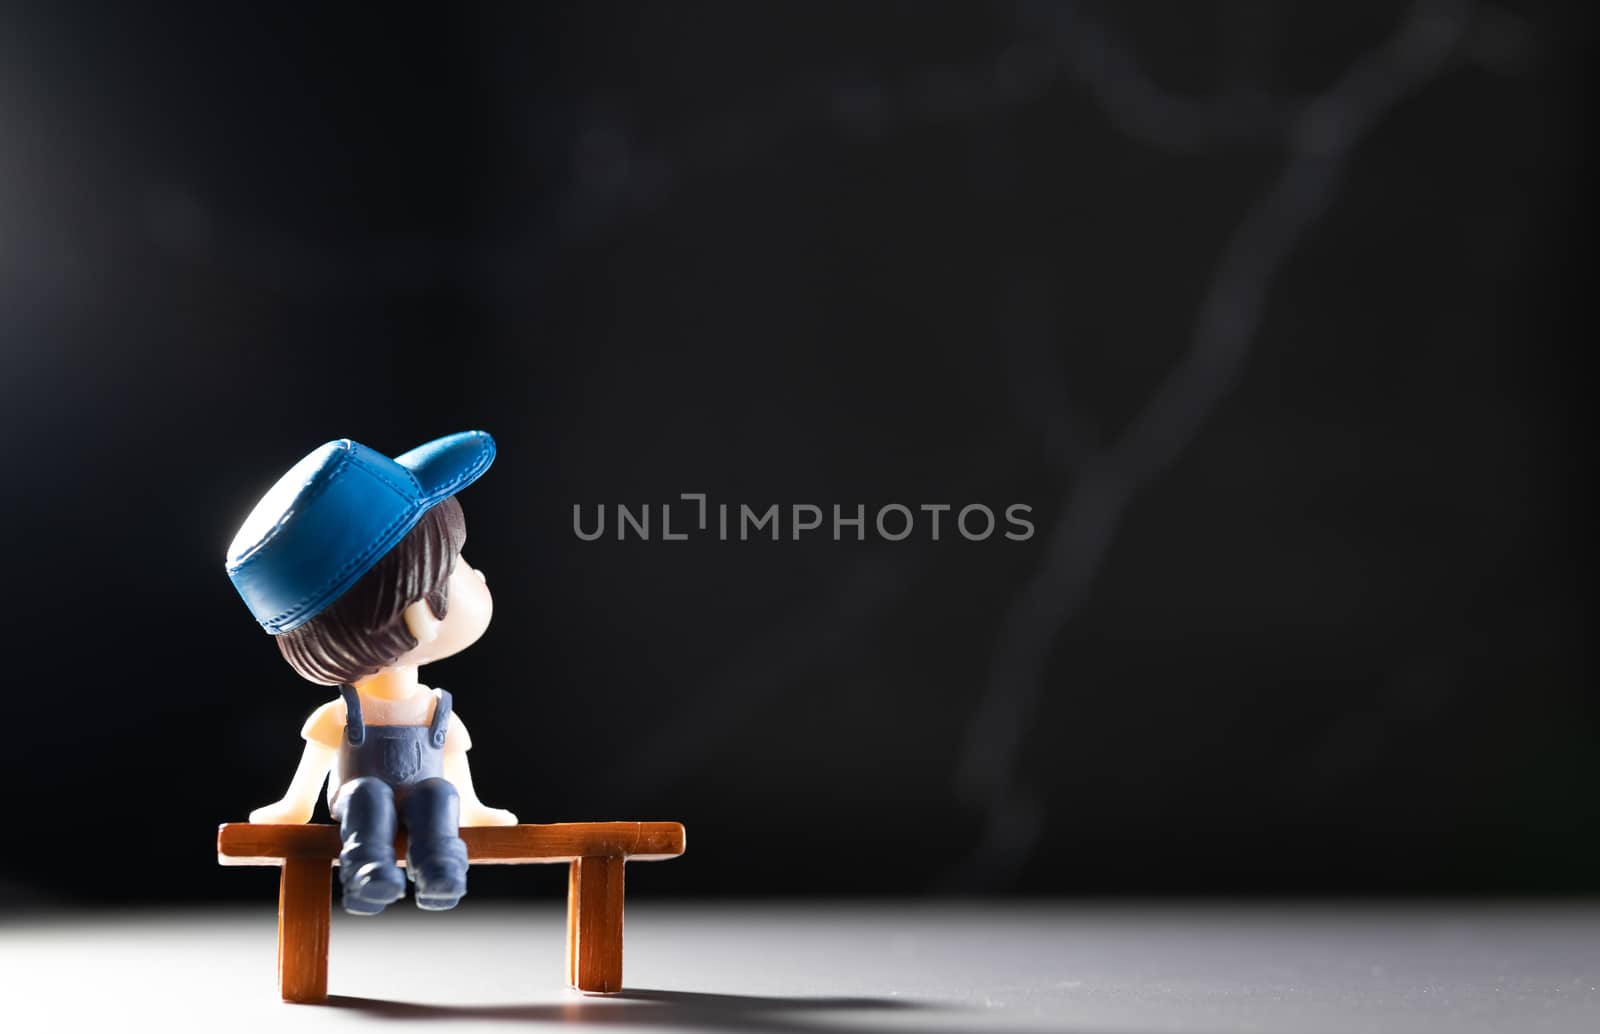 A small cartoon man sitting on a wooden table alone To wait or Demonstrated the idea of ​​a distant society to avoid the spread of coronary viruses or other contagious diseases